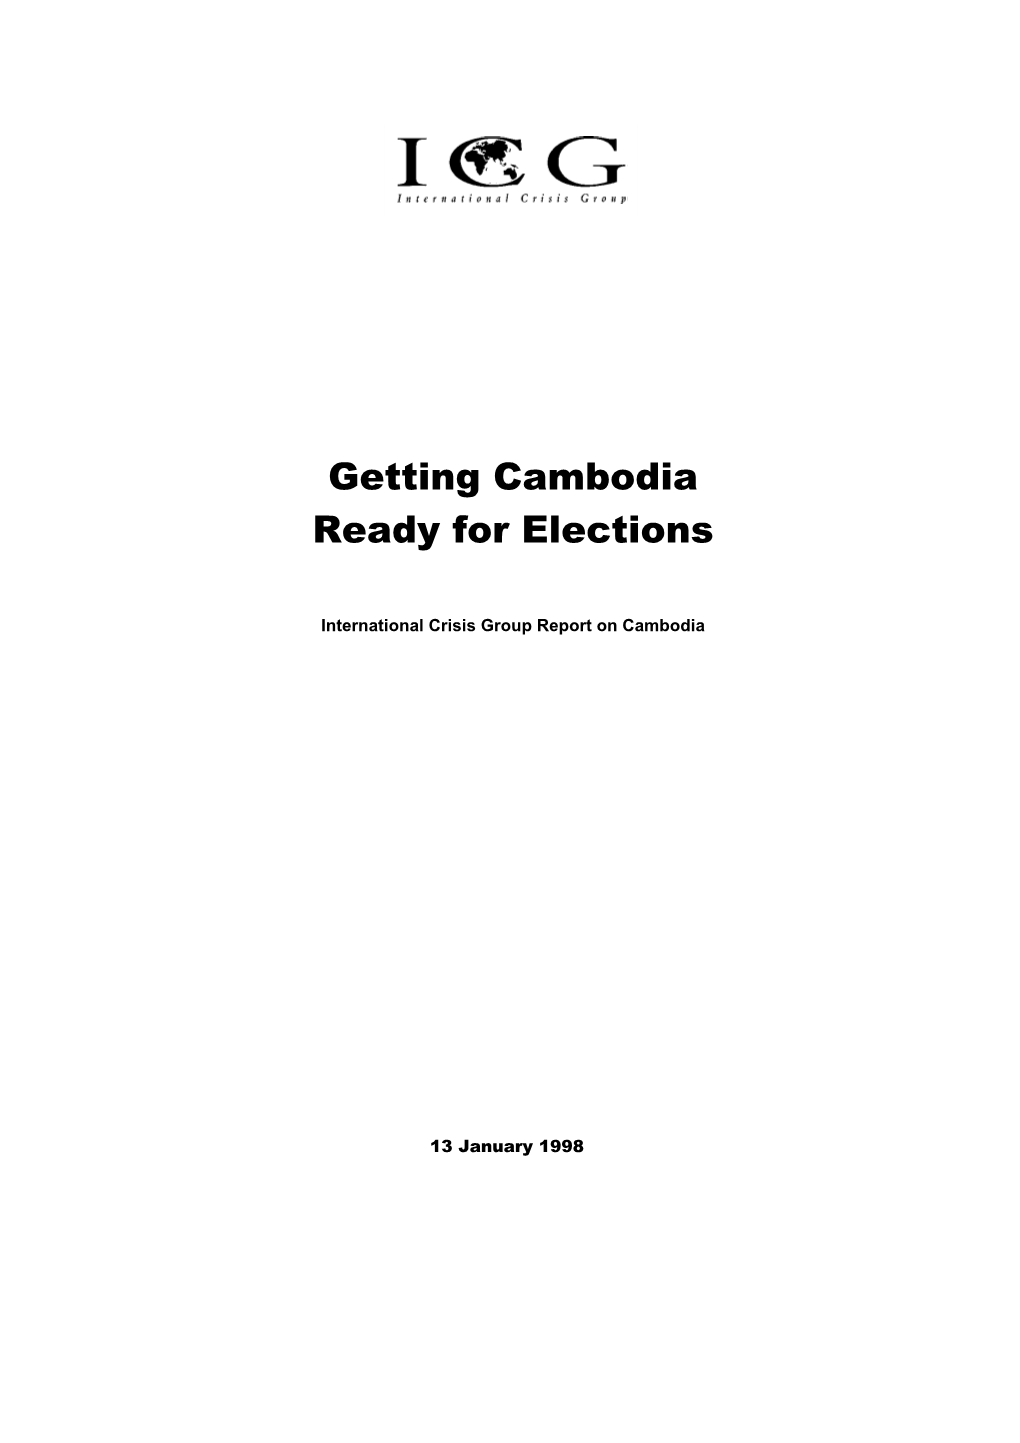 Getting Cambodia Ready for Elections